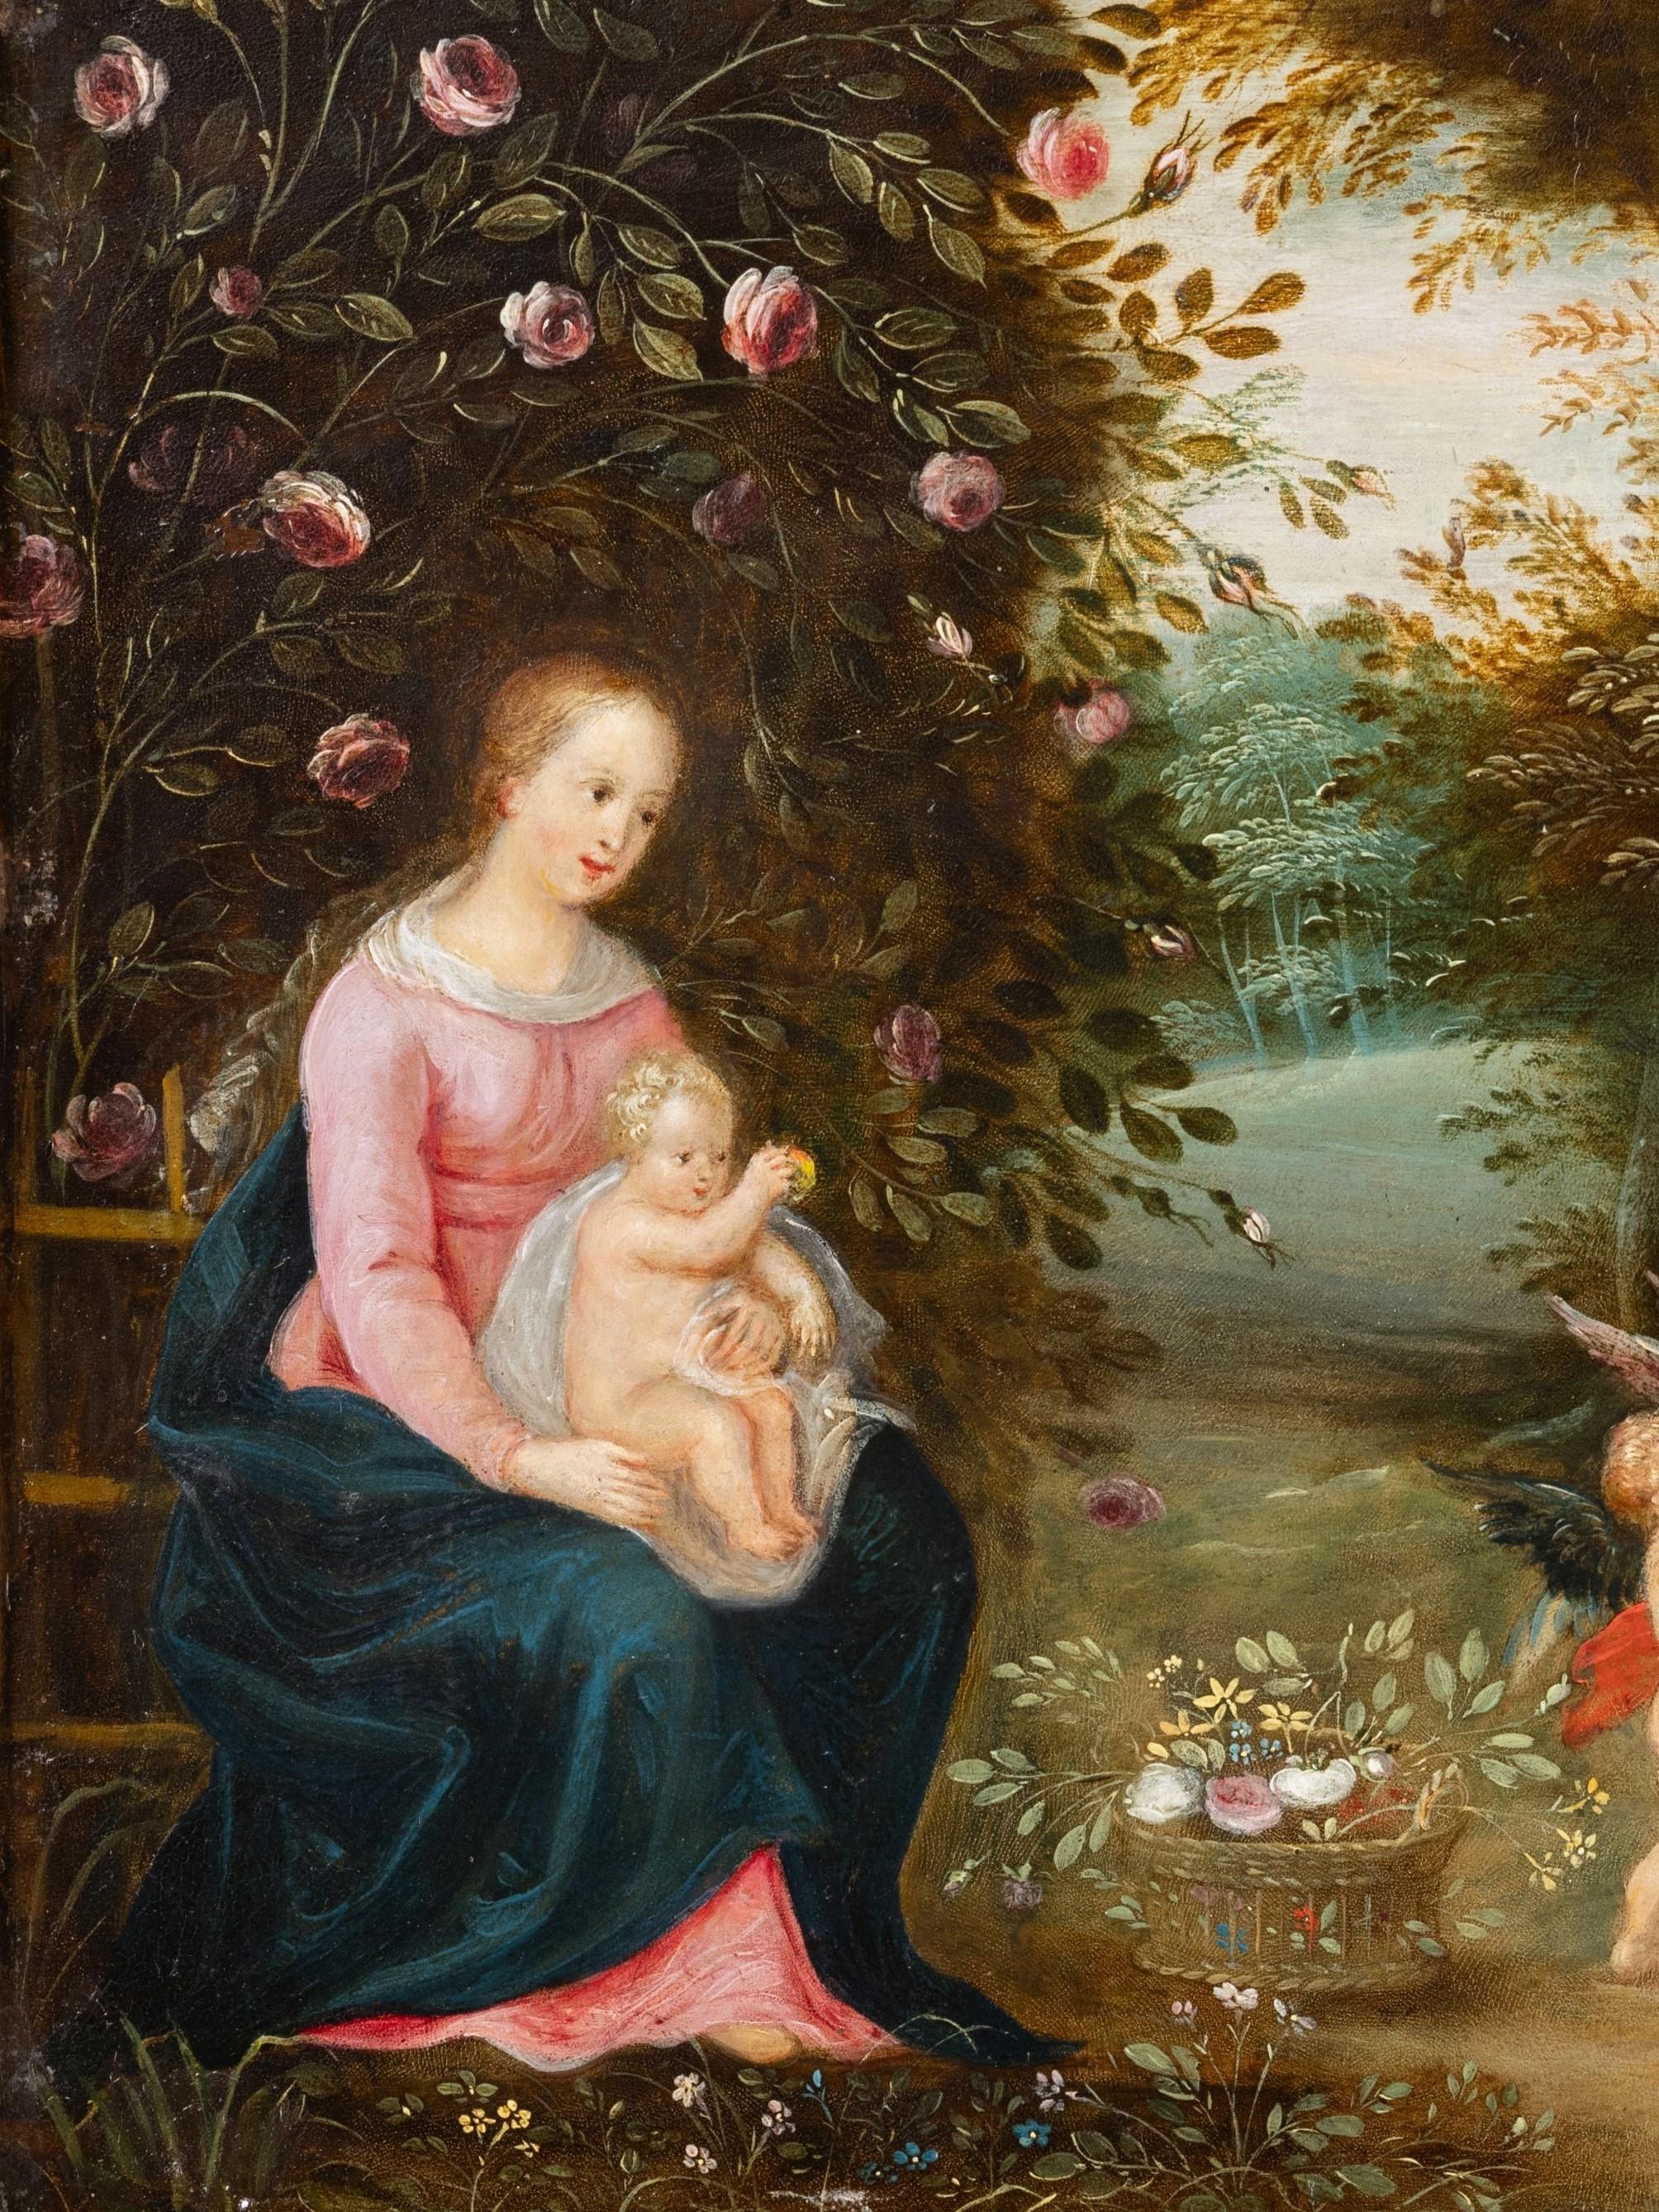 Madonna and child with angels, circle of H. van Balen, 17th c. Antwerp school - Old Masters Painting by Hendrick van Balen 